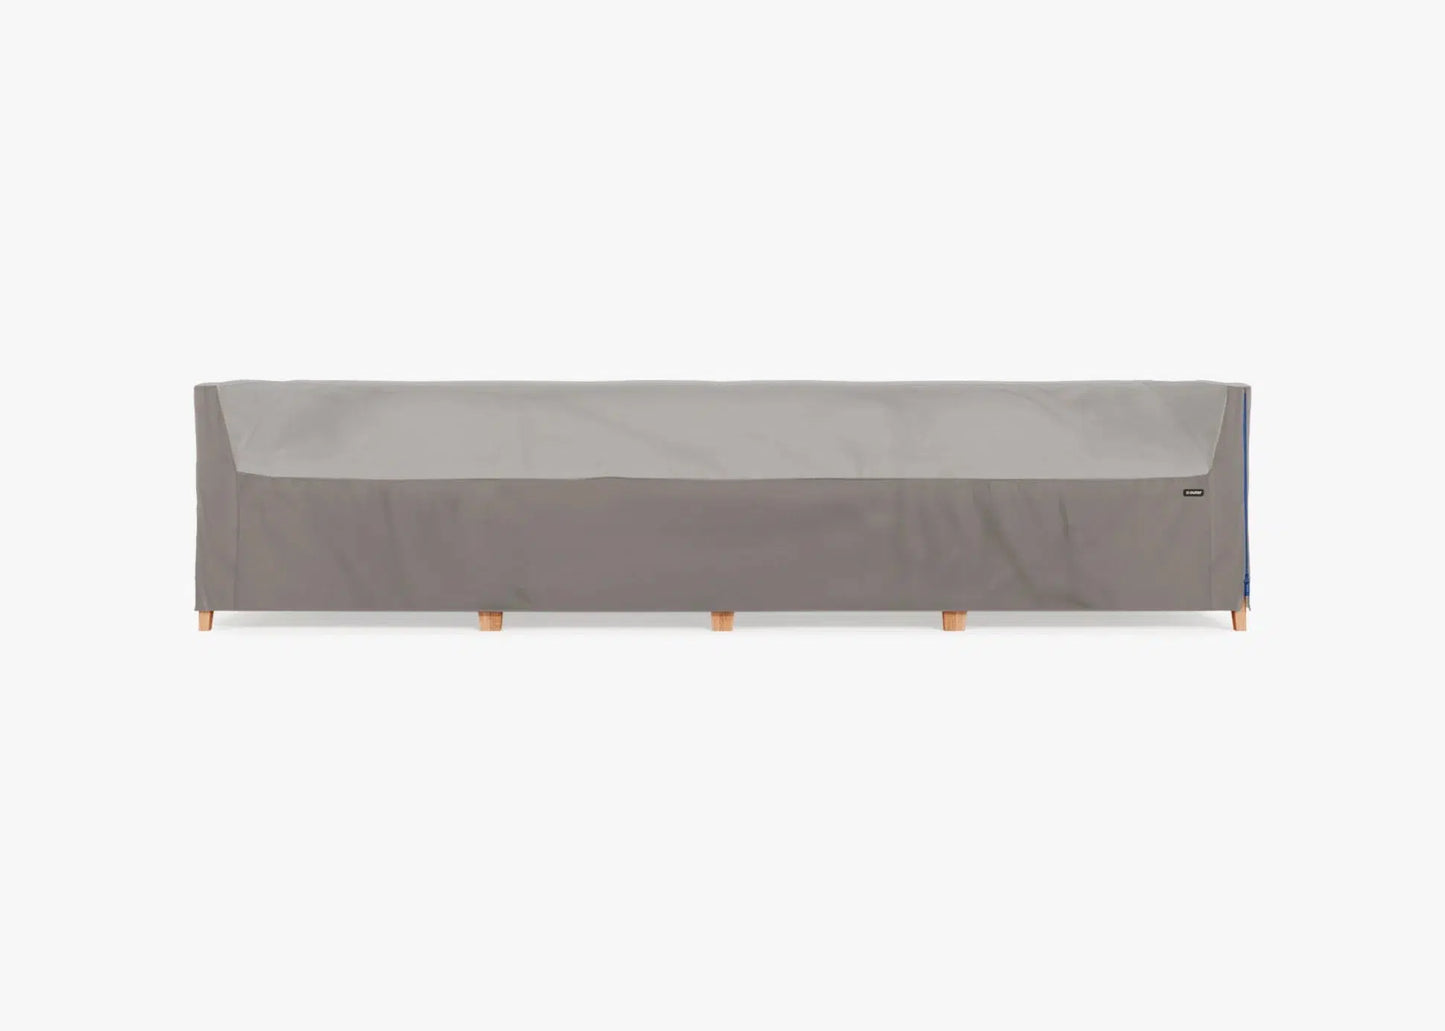 Live Outer Cover for Teak 4-Seat Sofa